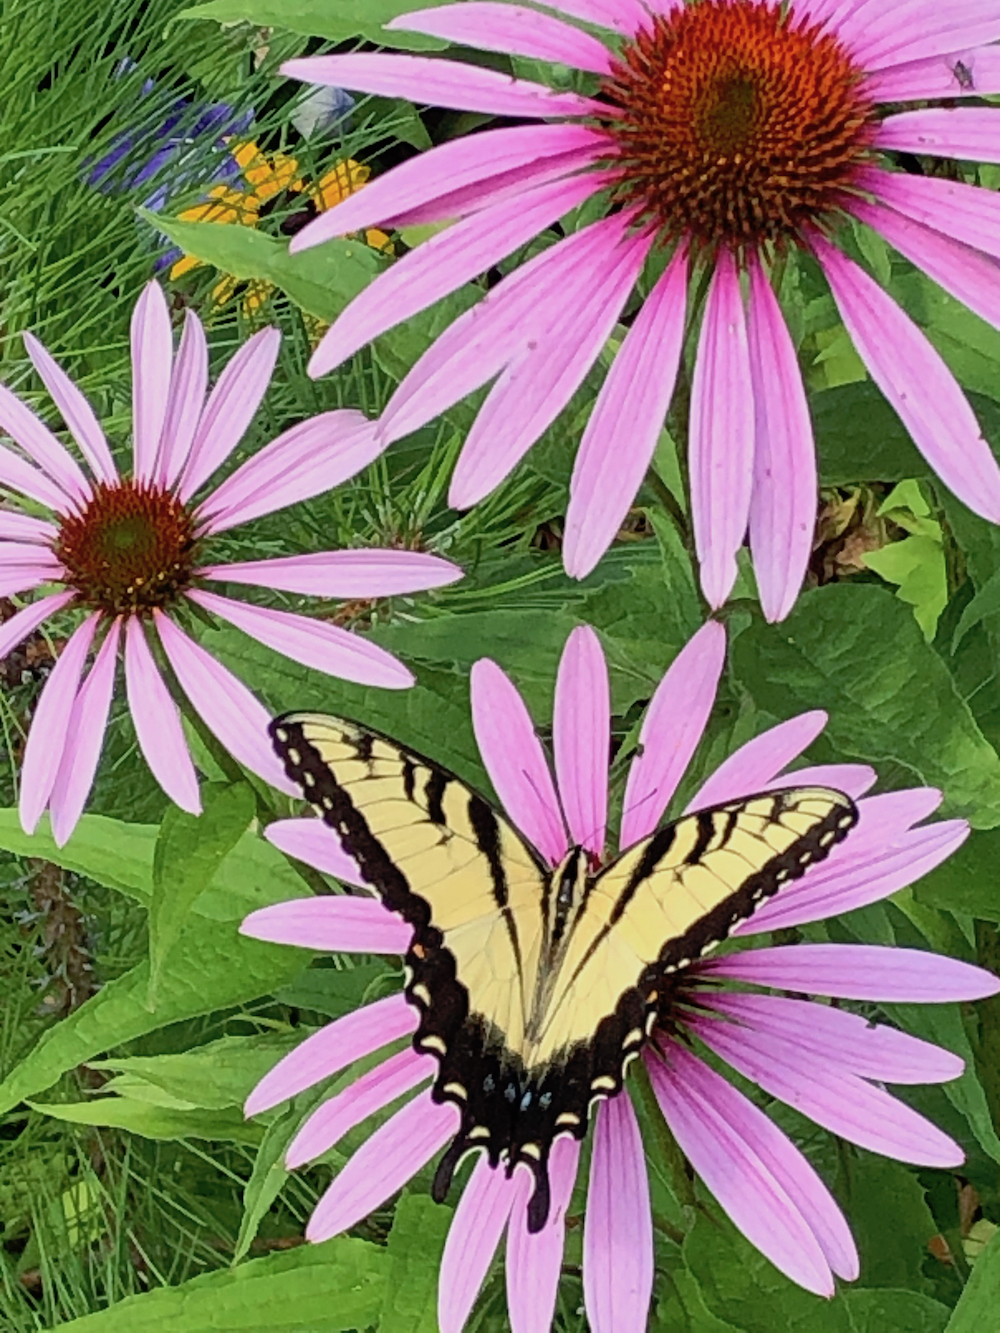 yellow-two-tailed swallowtail on echinacea.jpg